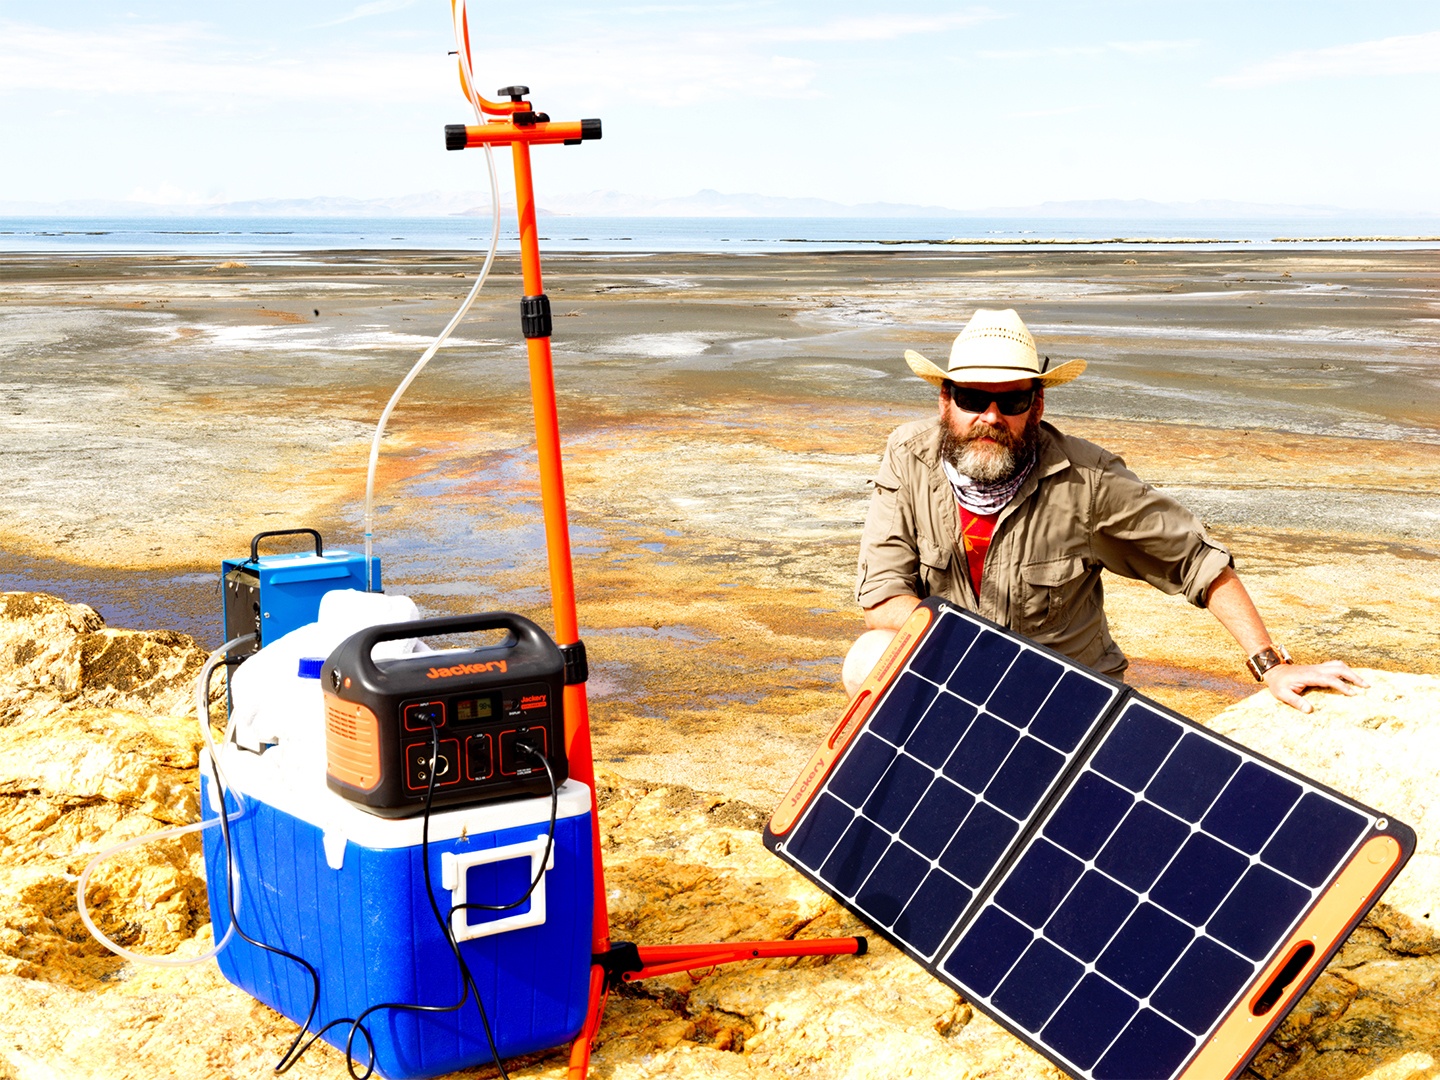 Dr. James Metcalf collects air and water samples in a desert background near the Great Salt Lake in Utah.